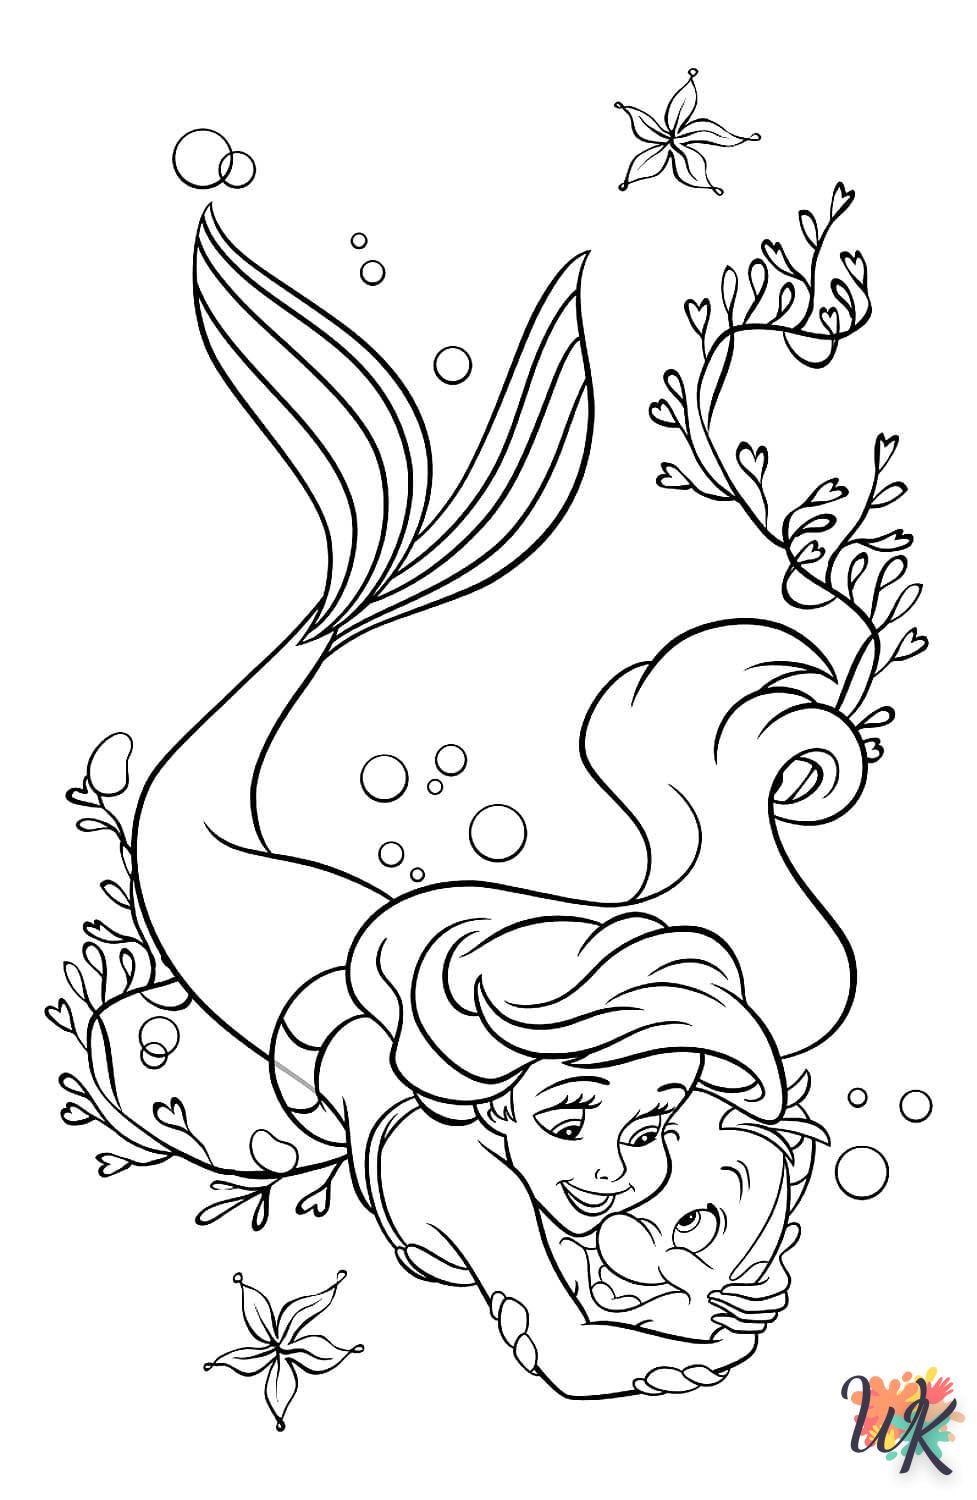 Disney coloring page to print for free pdf 1